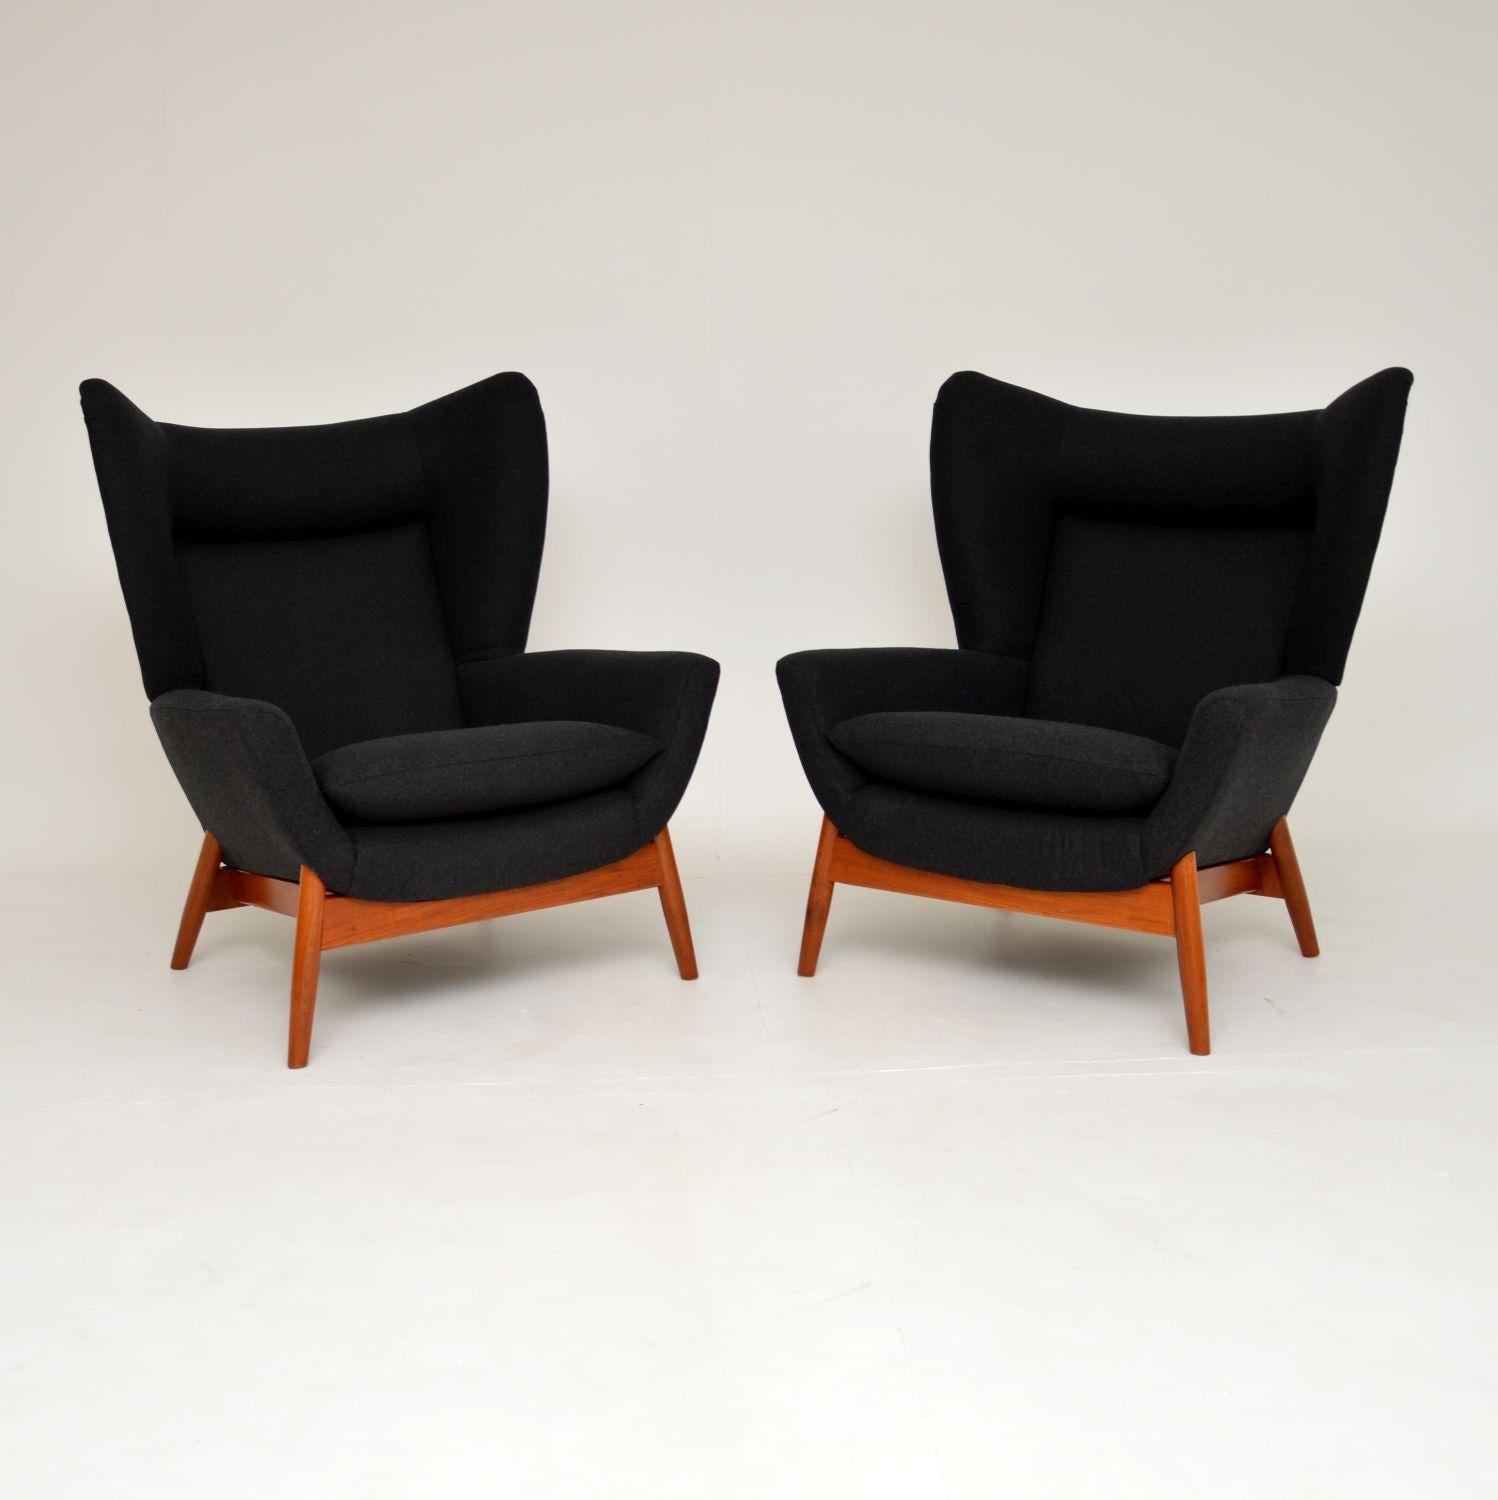 An outstanding pair of vintage Parker Knoll ‘Merrywood’ armchairs. These were made in England, they date from the 1960’s.

This is a very rare model, and the quality is superb. They are very generous in proportions, and are extremely comfortable.